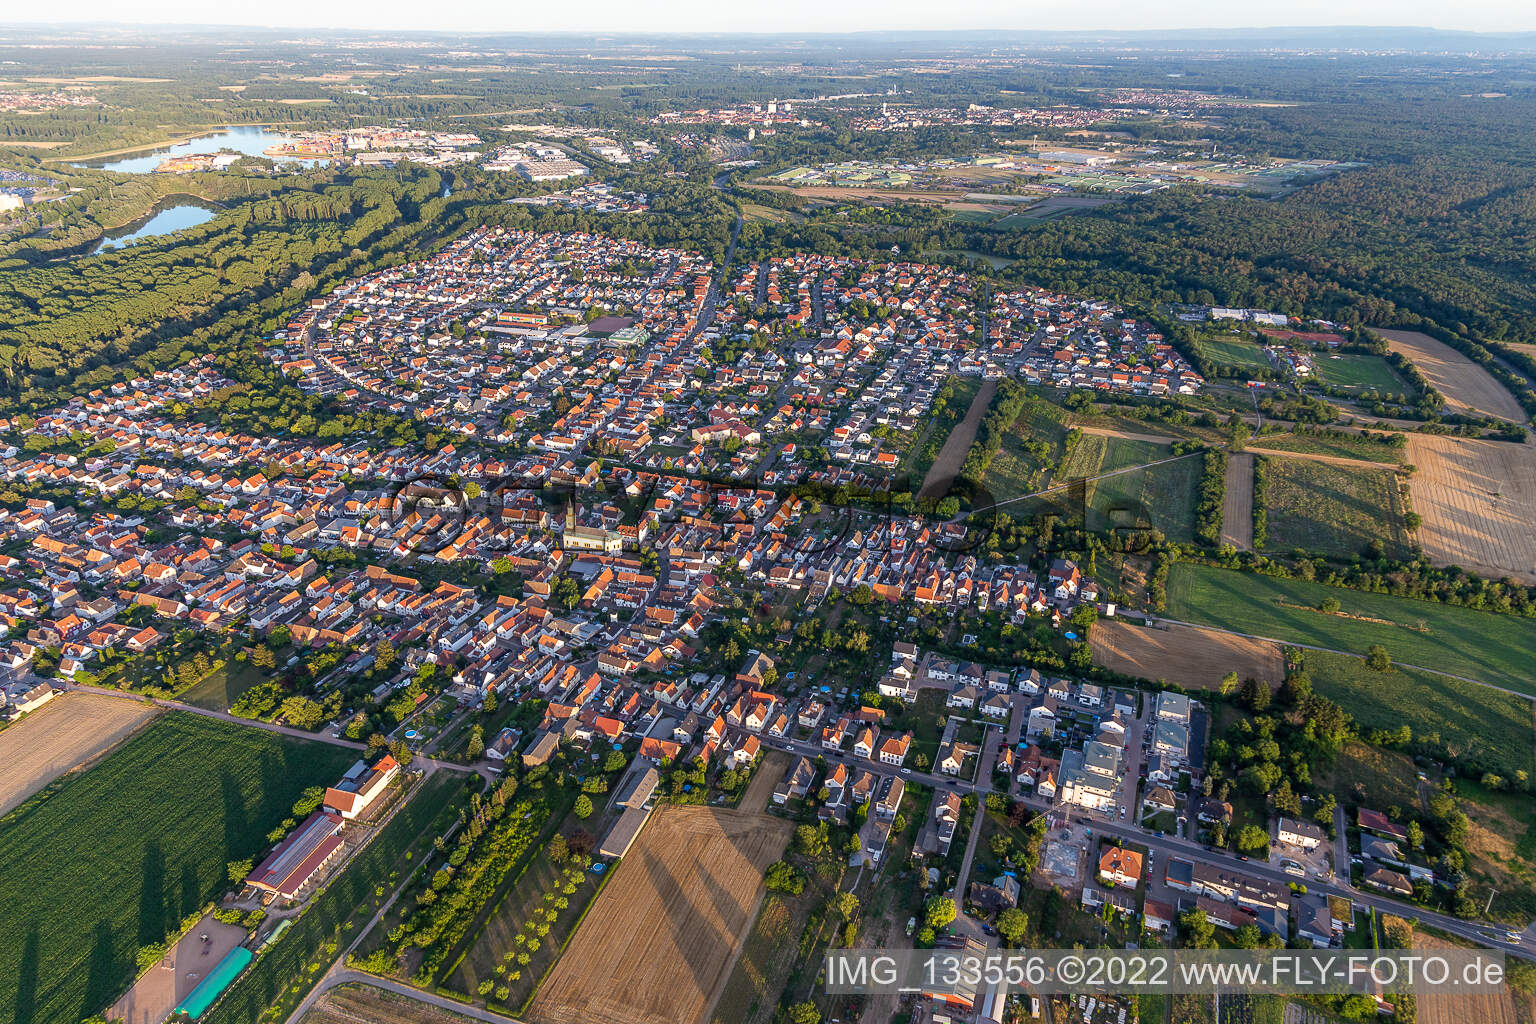 Lingenfeld in the state Rhineland-Palatinate, Germany from the drone perspective